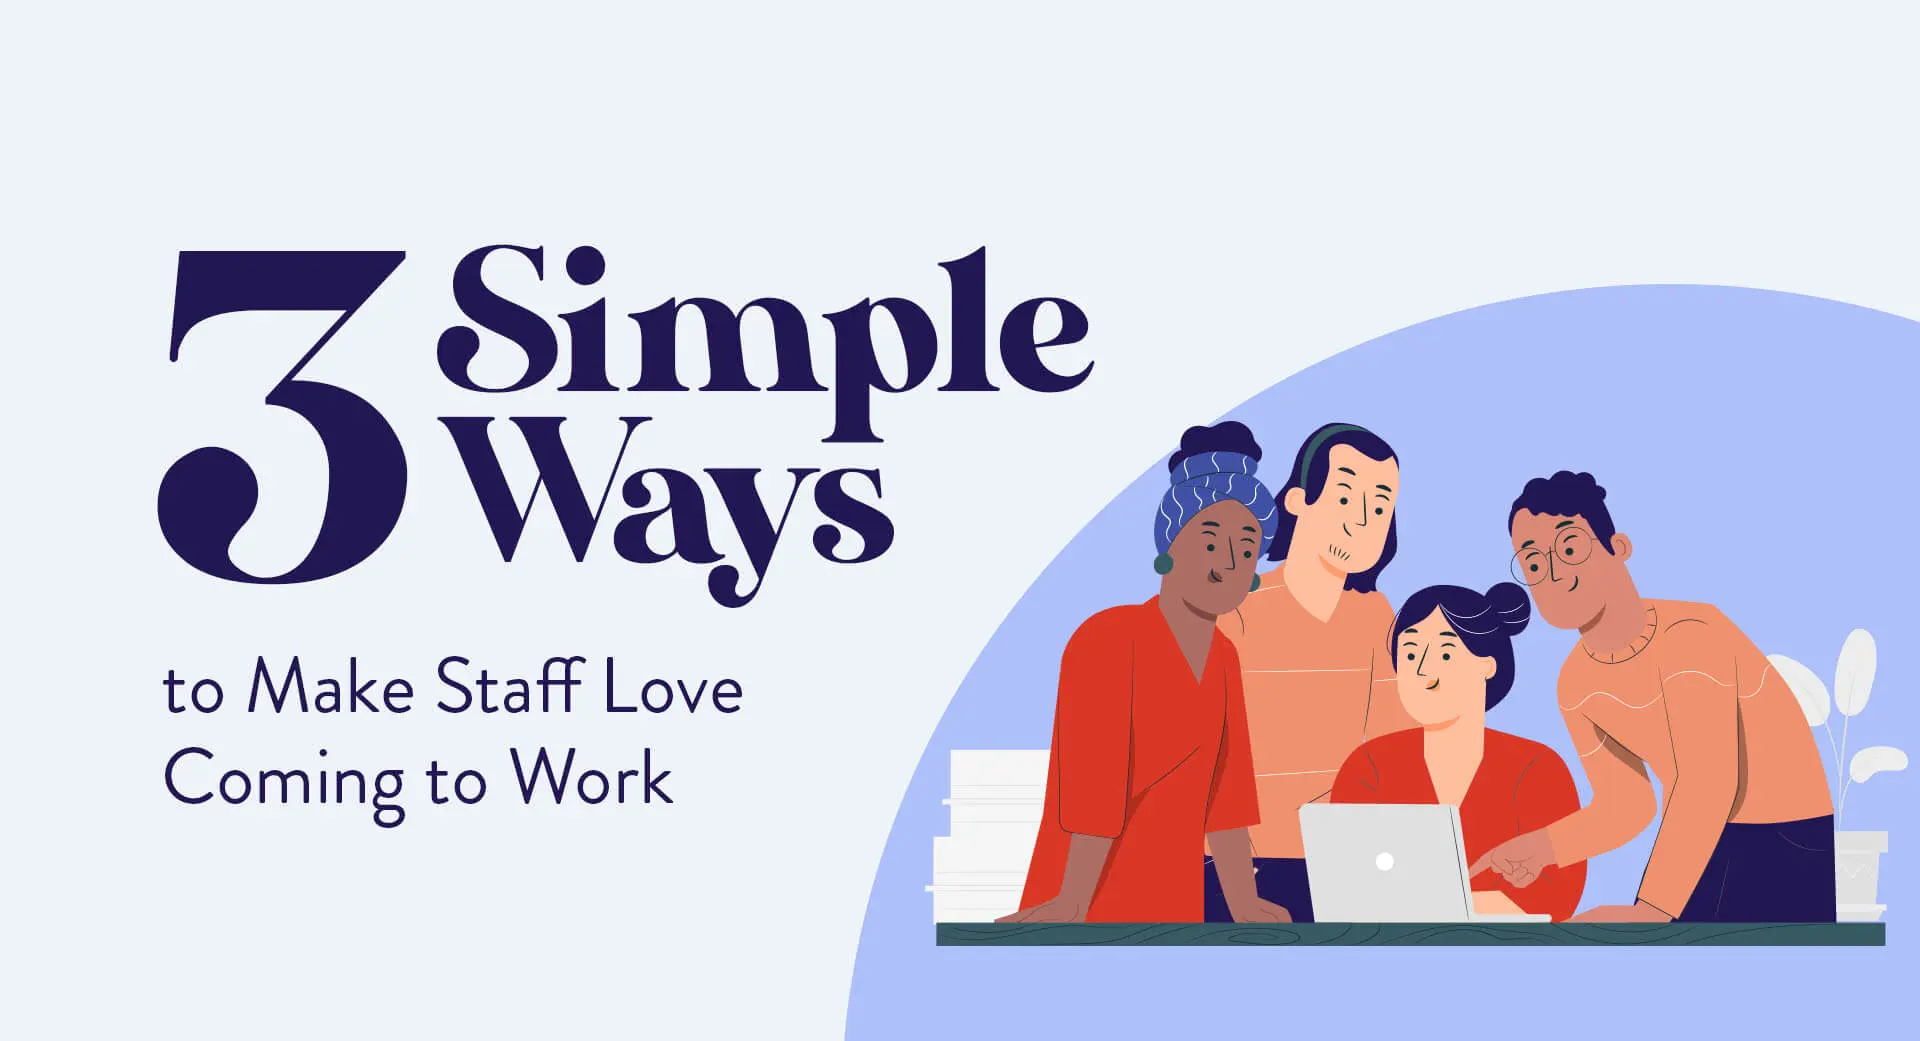 3 Simple Ways to Make Staff Love Coming to Work